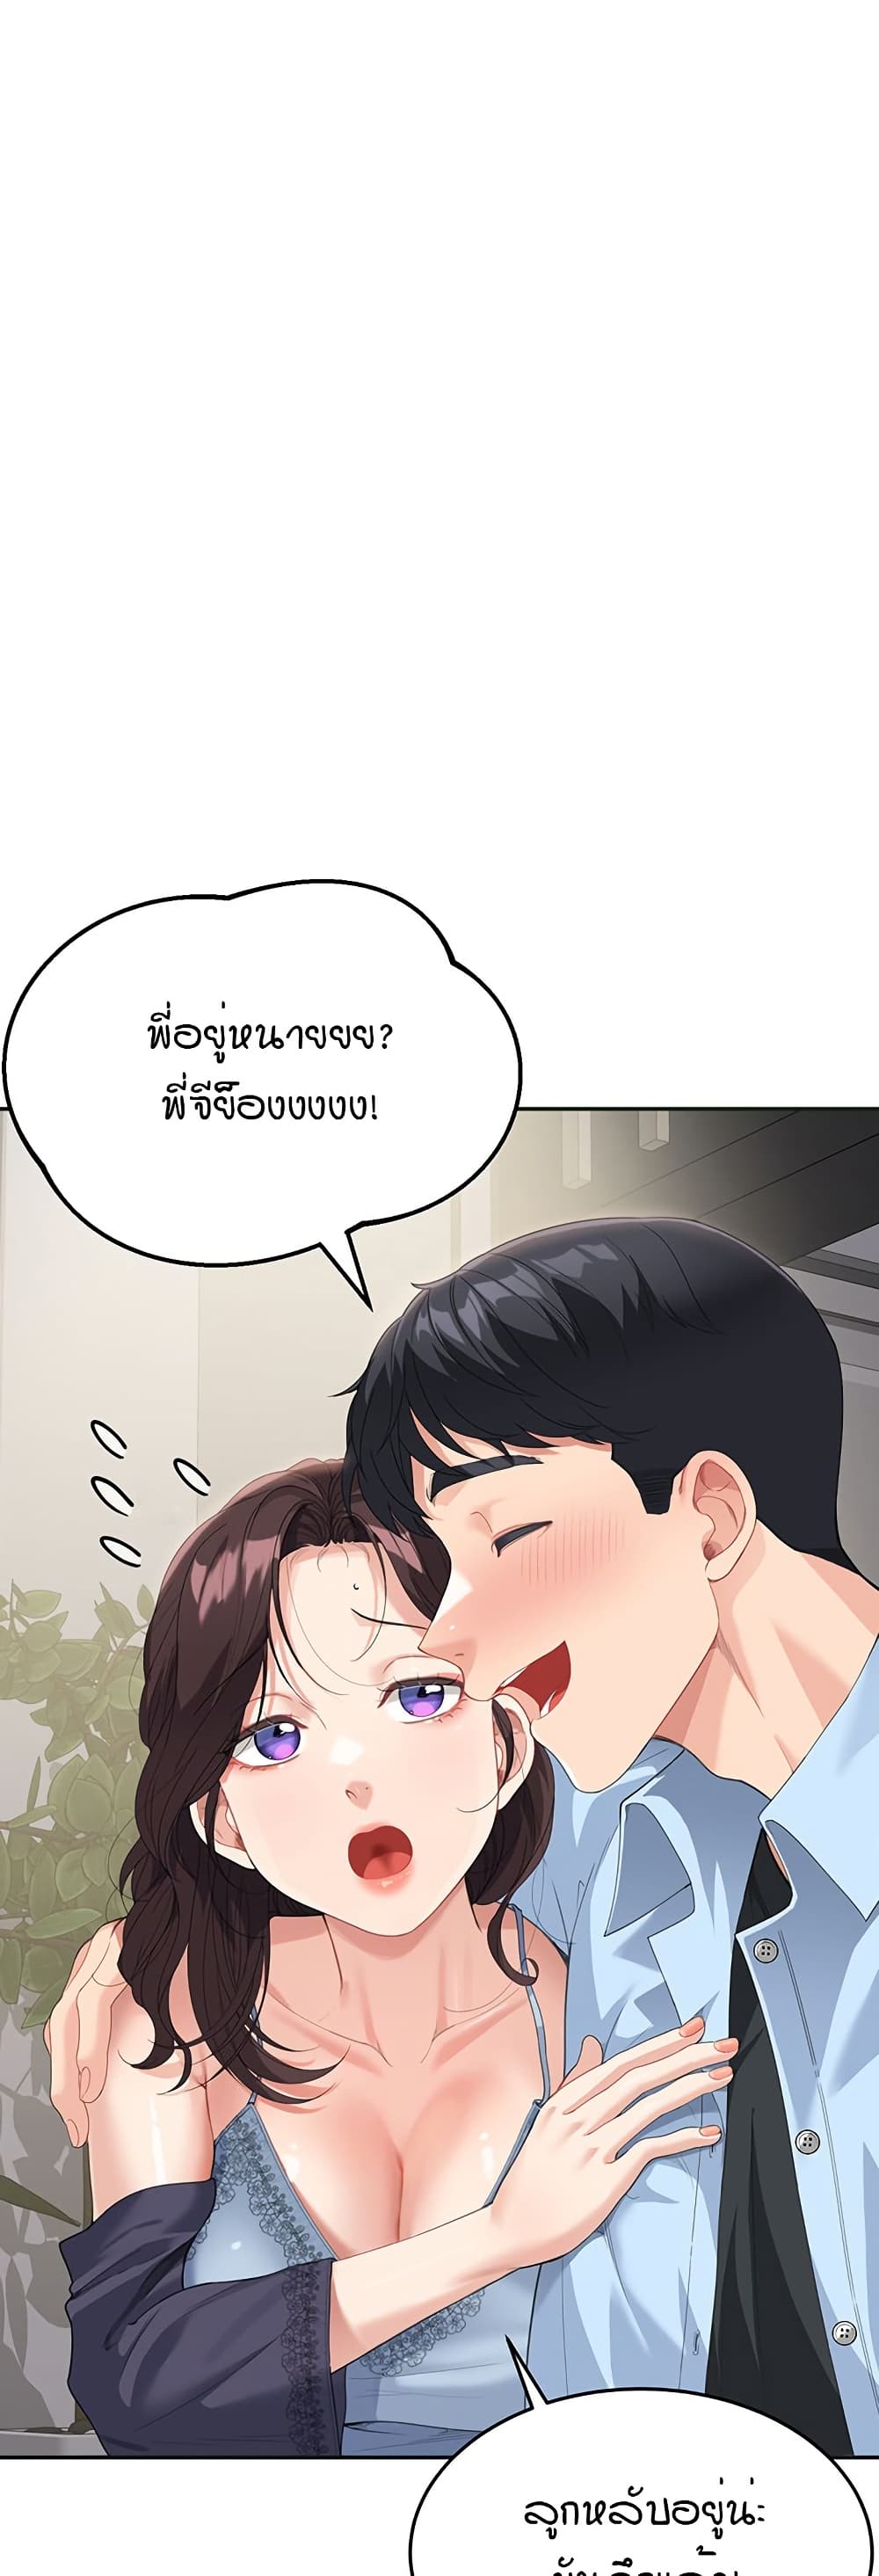 Is It Your Mother or Sister? ตอนที่ 7 ภาพ 39